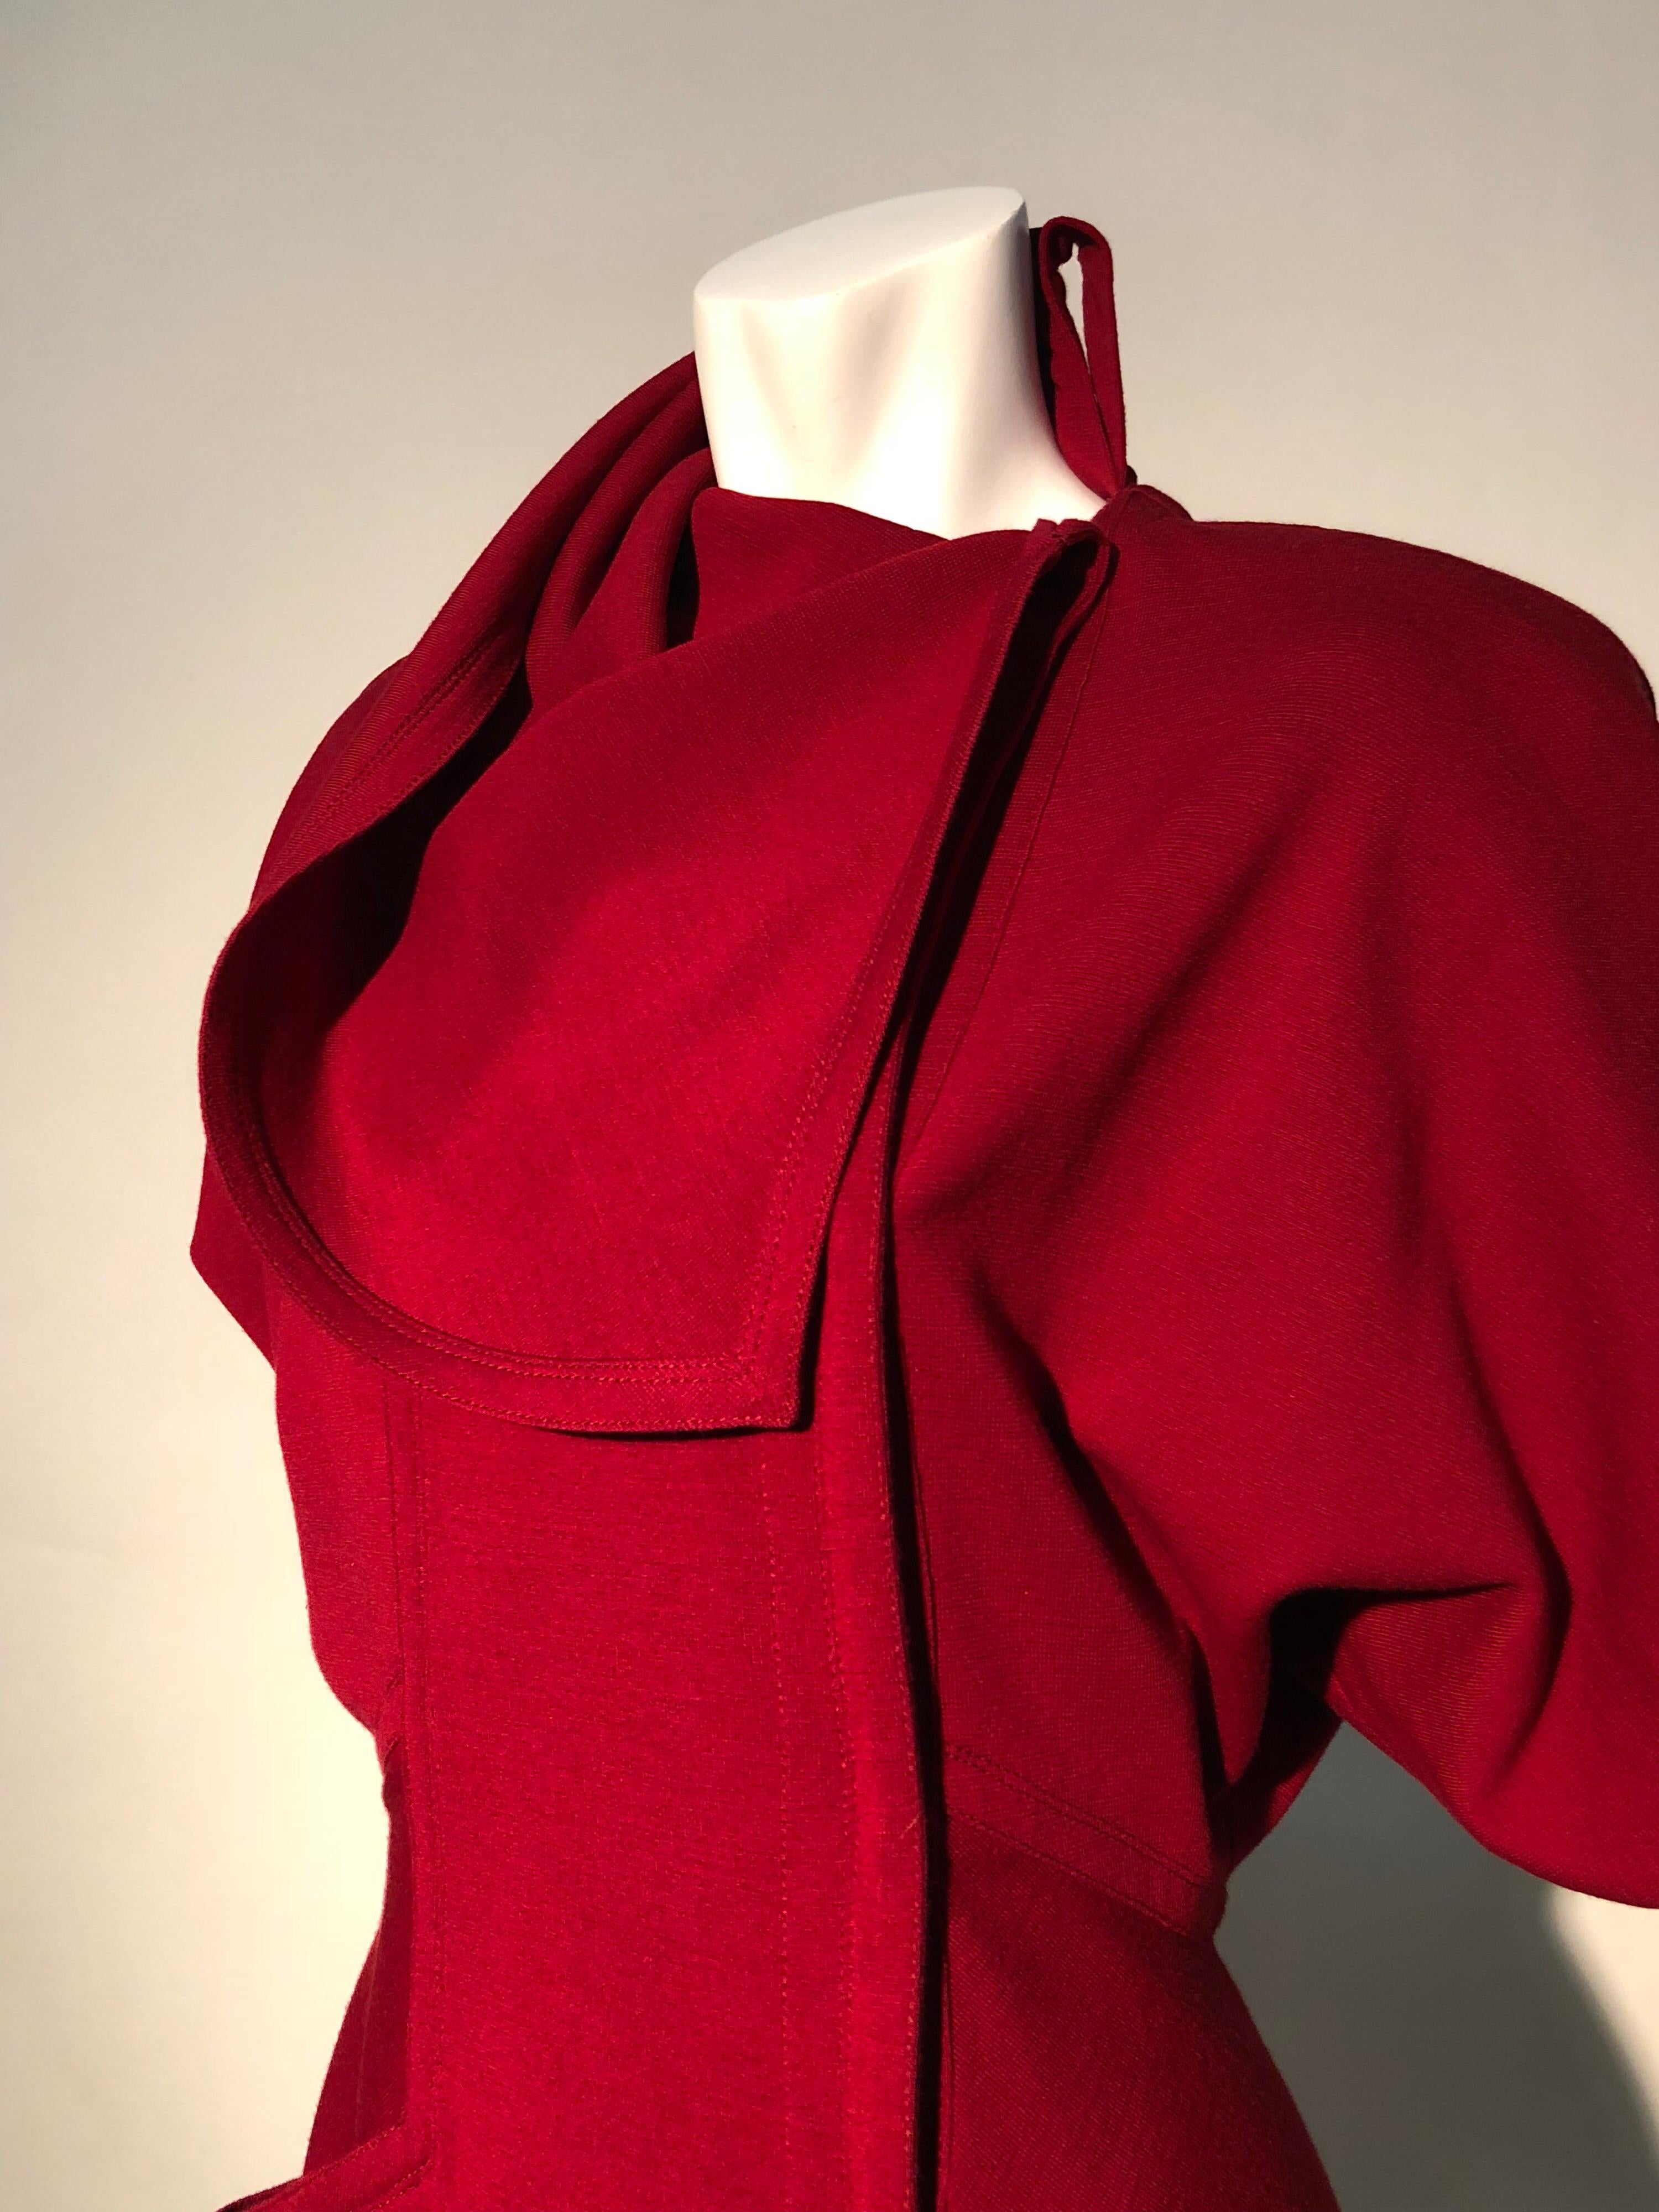 1980s Gianni Versace Vivid Red Wool Wrap-Style Coat Dress W/ Attached Foulard For Sale 5